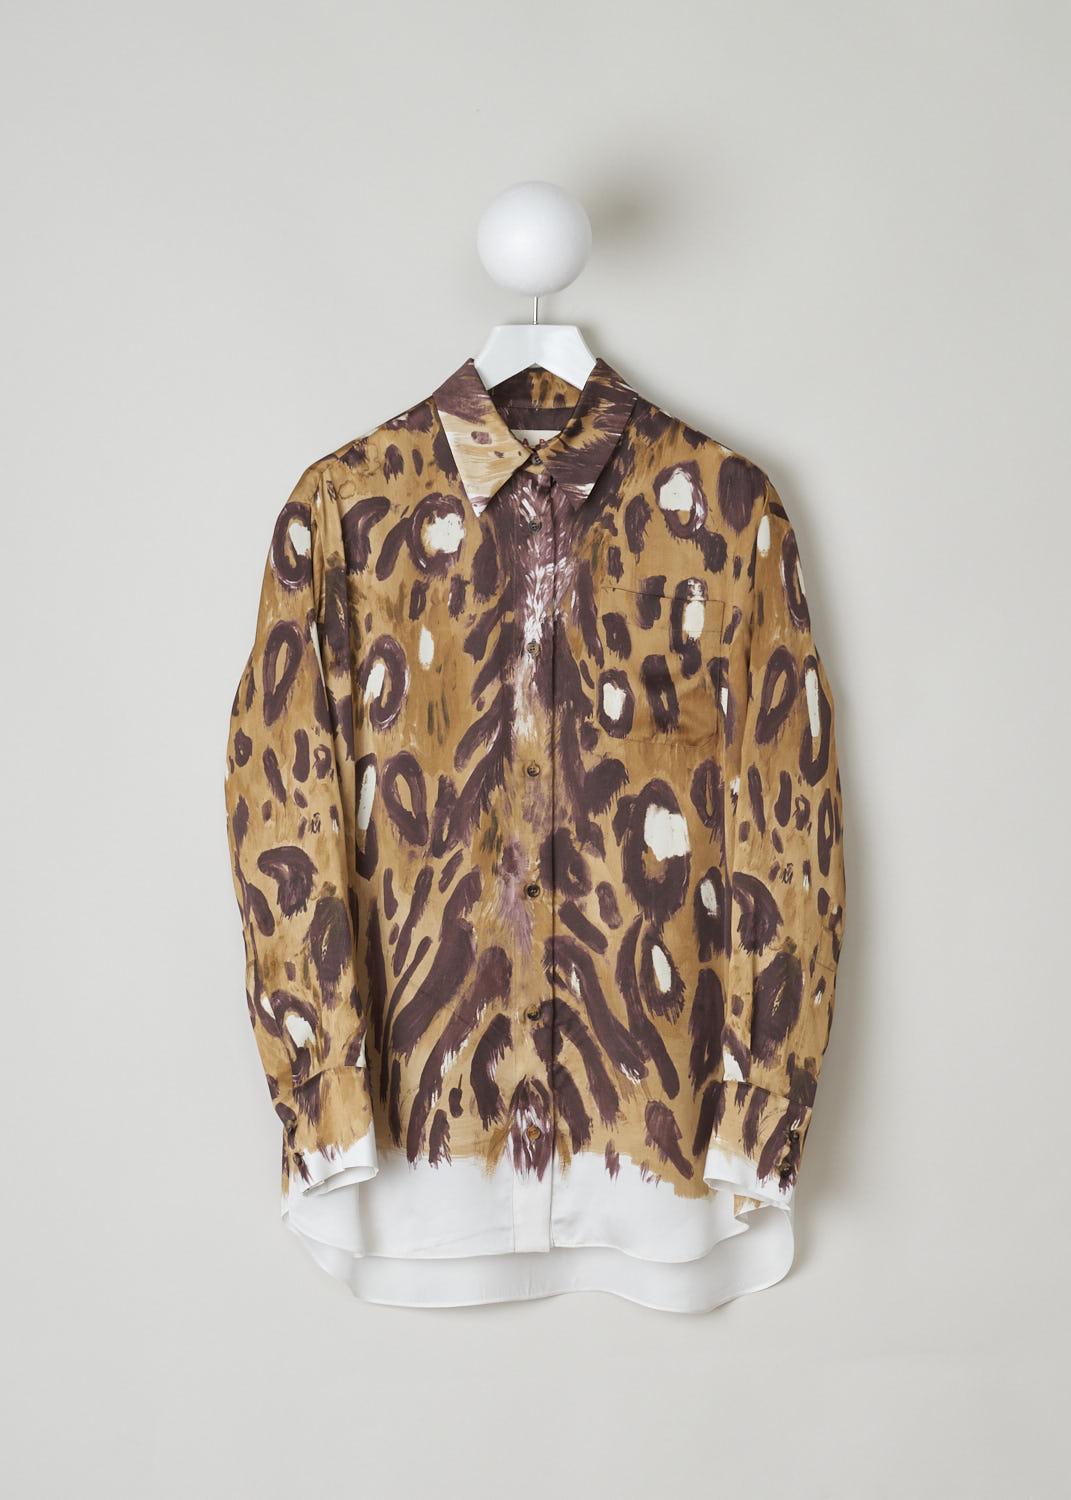 MARNI, ANIMAL PRINT BLOUSE WITH LONG SLEEVES, CAMA0490A0_UTV912_WBM20, Print, Brown, Front, This long sleeved blouse is made in a satin animal print. This blouse features a classic collar, a single breast pocket and front button fastening. This model has an asymmetrical finish, meaning the back is a little longer than the front.


